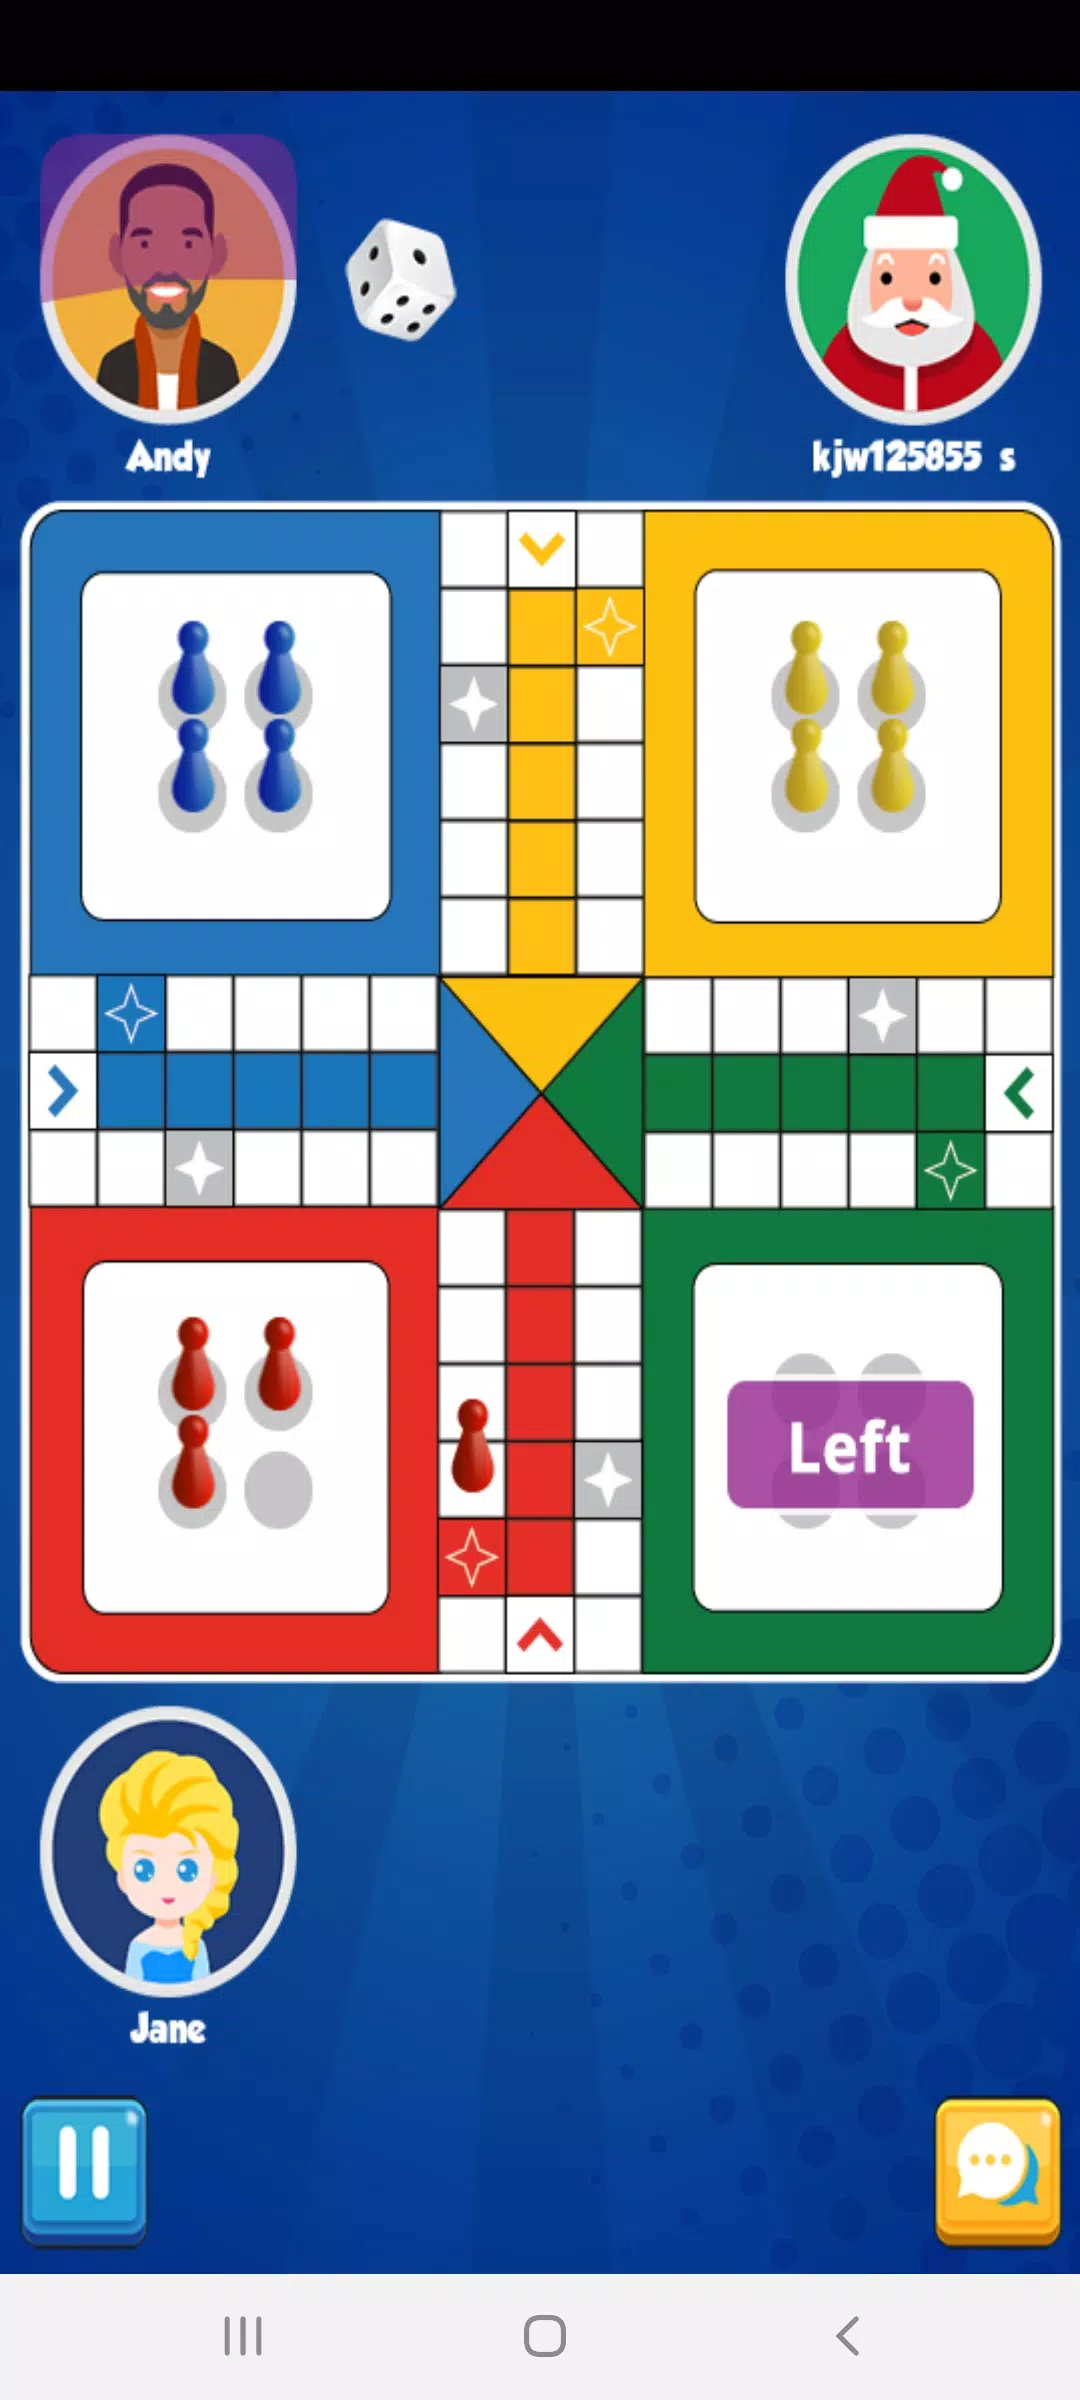 Download DH Ludo Hero on Android, APK free latest version